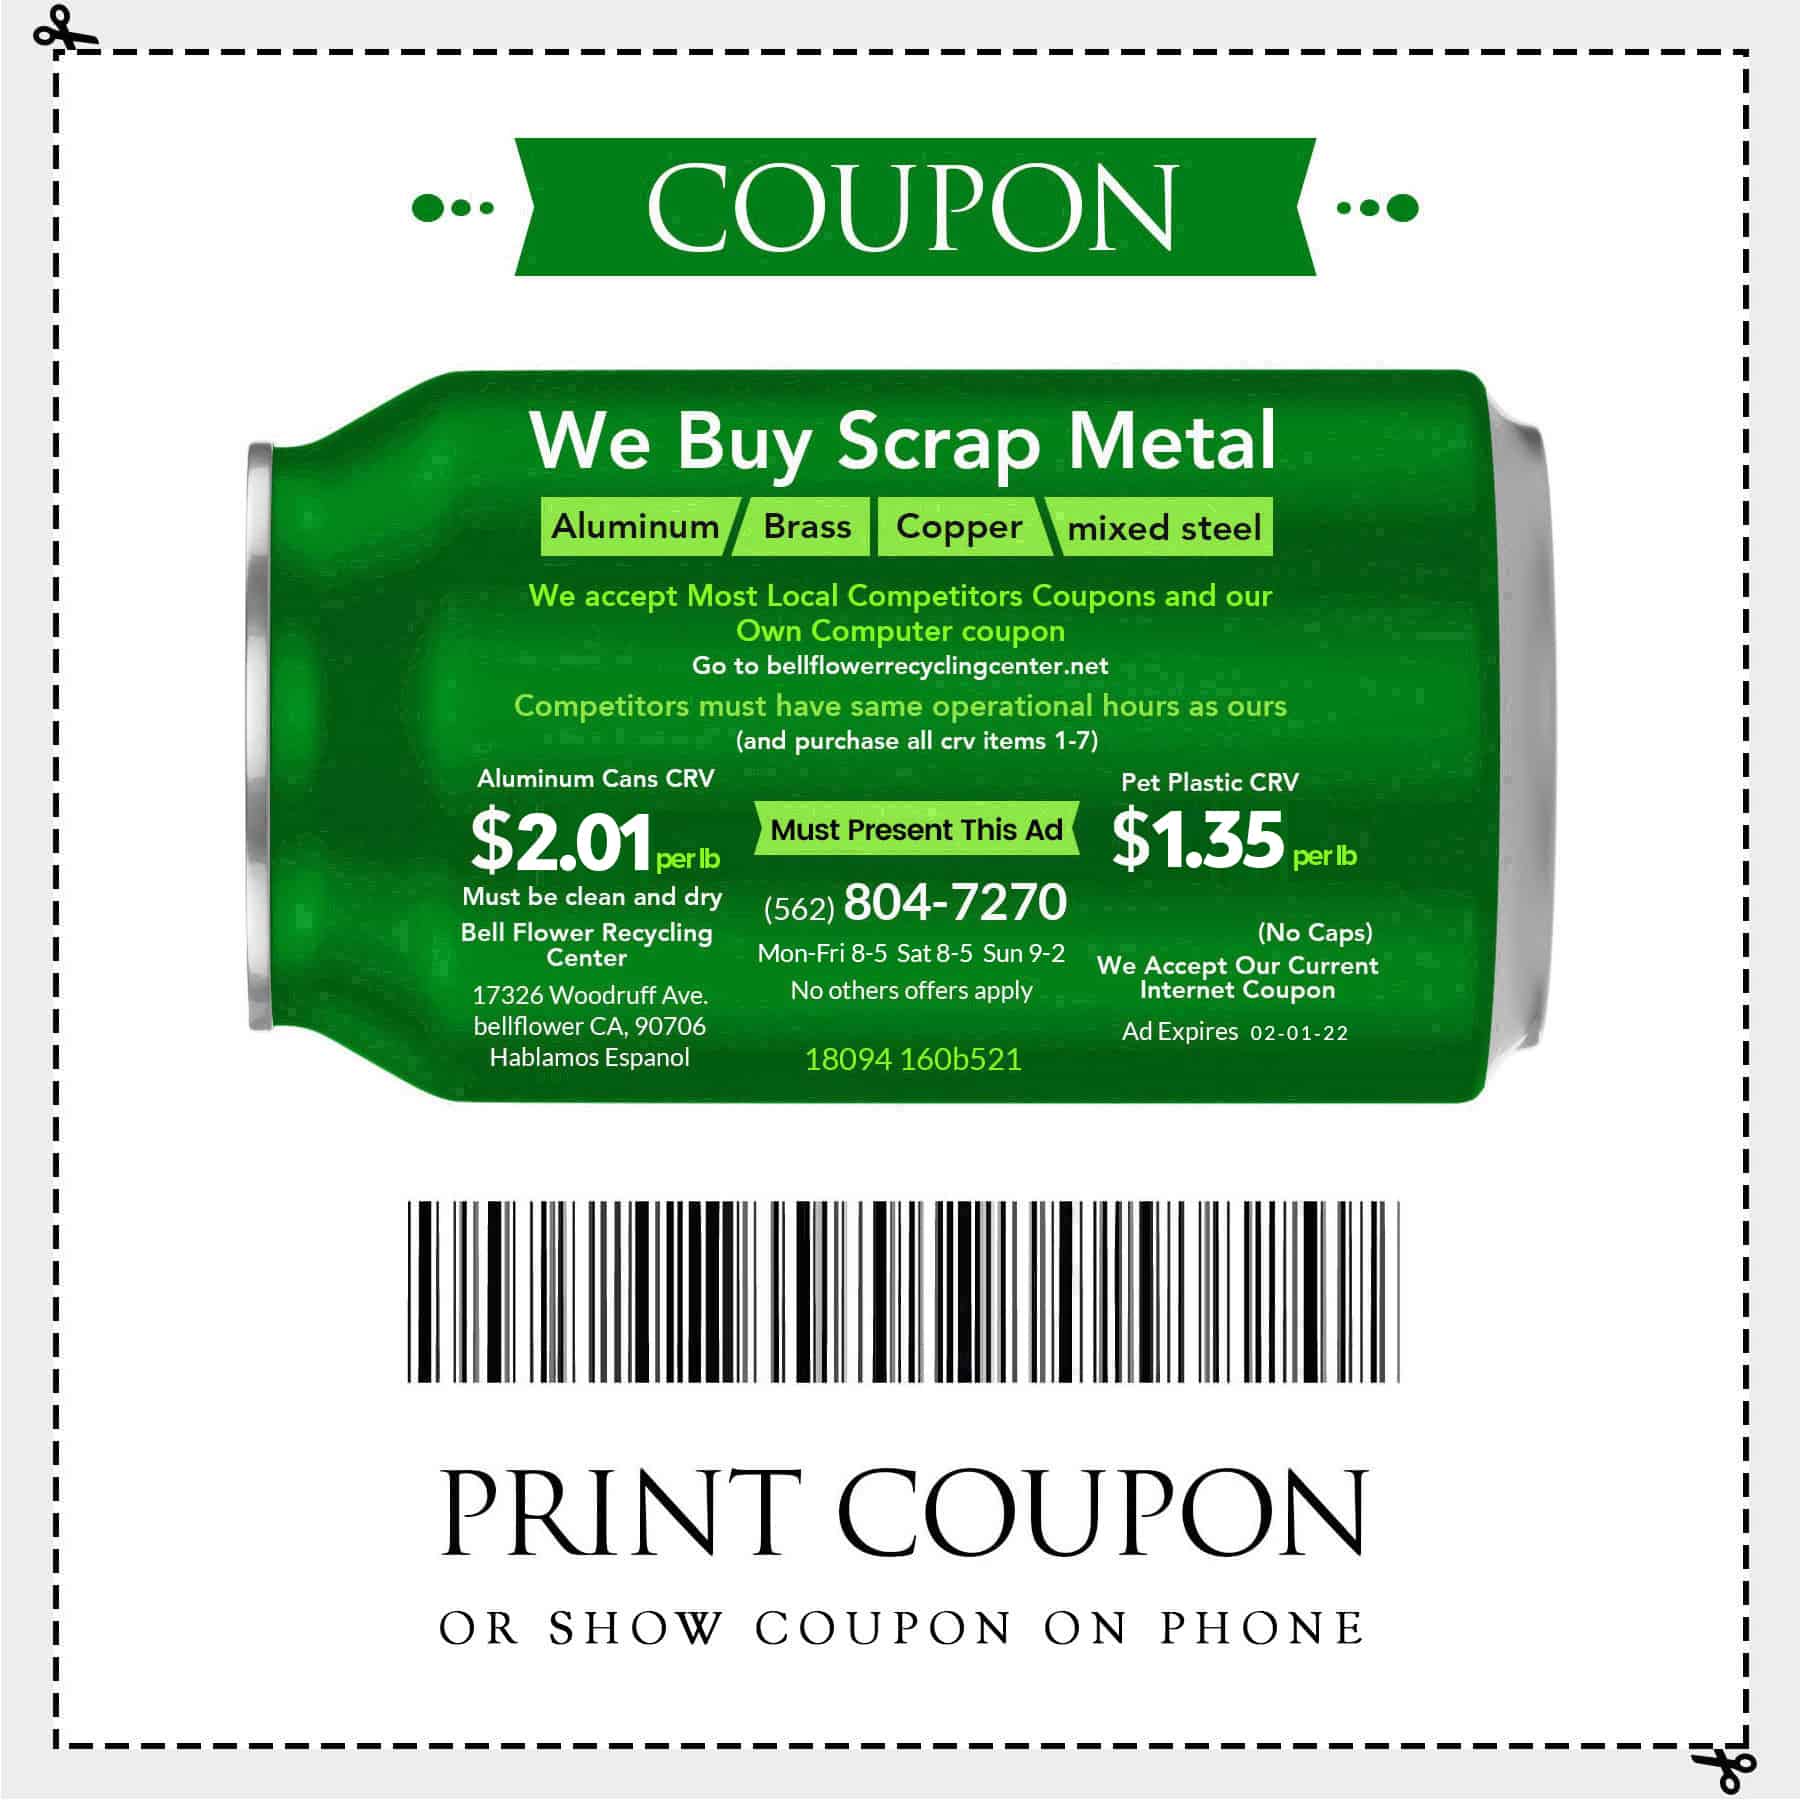 We buy scrap metal Aluminum, Brass, Copper, Mixed steel. We accept most local competitors coupons and our own computer coupon. Competitors must have same operational hours as ours (and purchase all crv items 1-7). One Must present this add. Aluminum Cans CRV $2.01 per lb and Pet Plastic CRV $1.35 per lb.